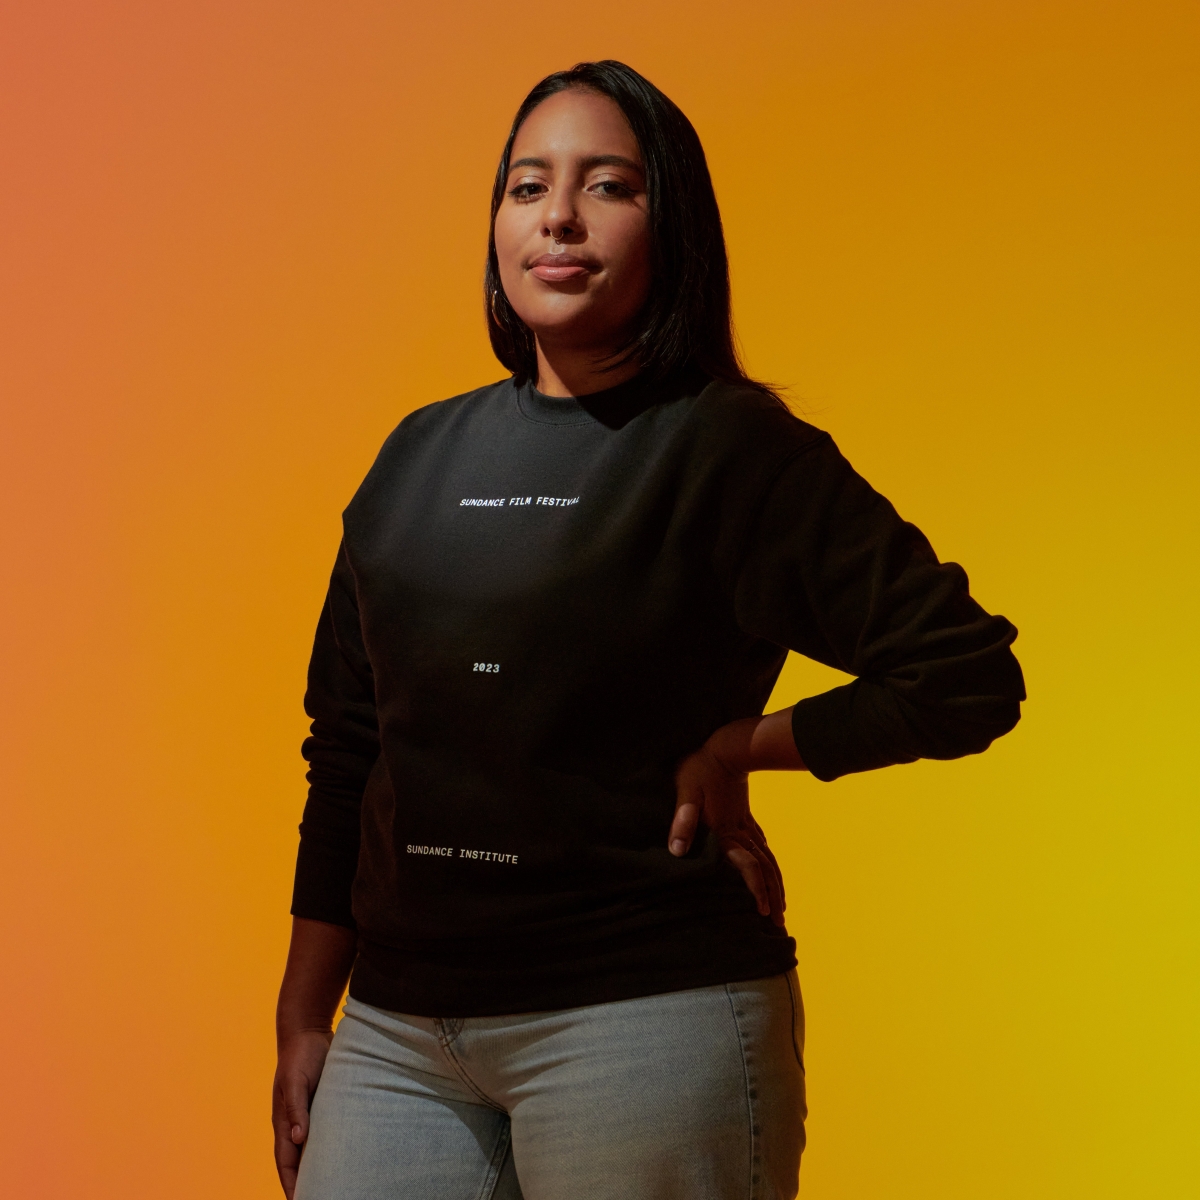 Headshot of Amber Espinosa-Jones, who is wearing a 2023 Sundance sweatshirt while standing in front of a yellow-orange background.